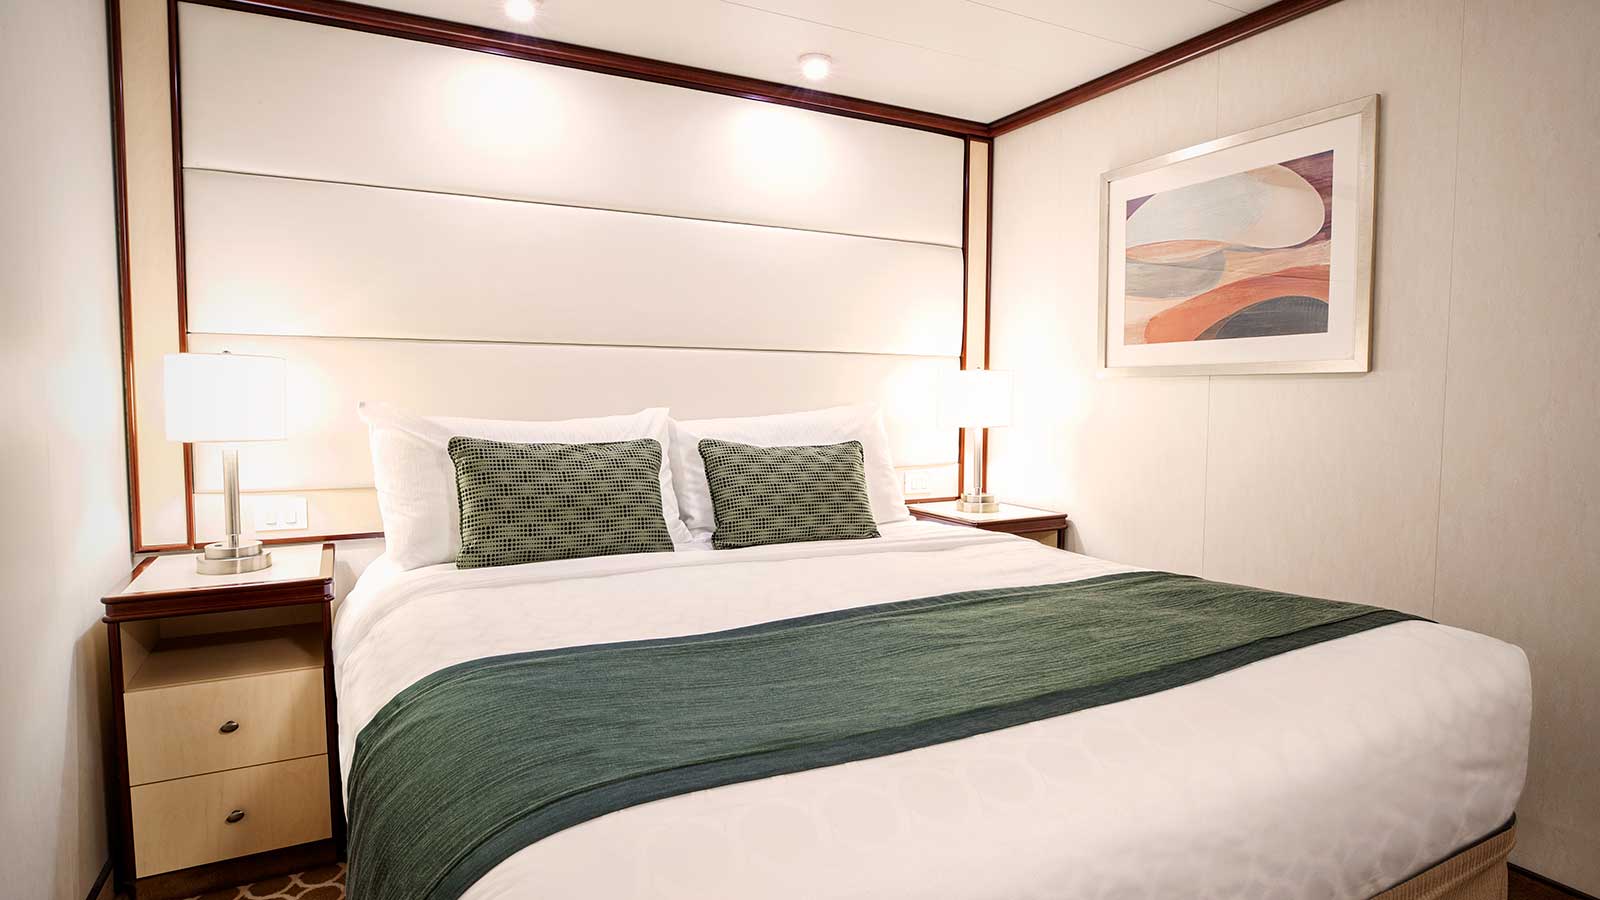 Image of Interior Accommodation, sourced from: Princess Cruise Lines https://www.princess.com/images/global/ships-and-experience/ships/products/staterooms/royal-class-interior-1600.jpg